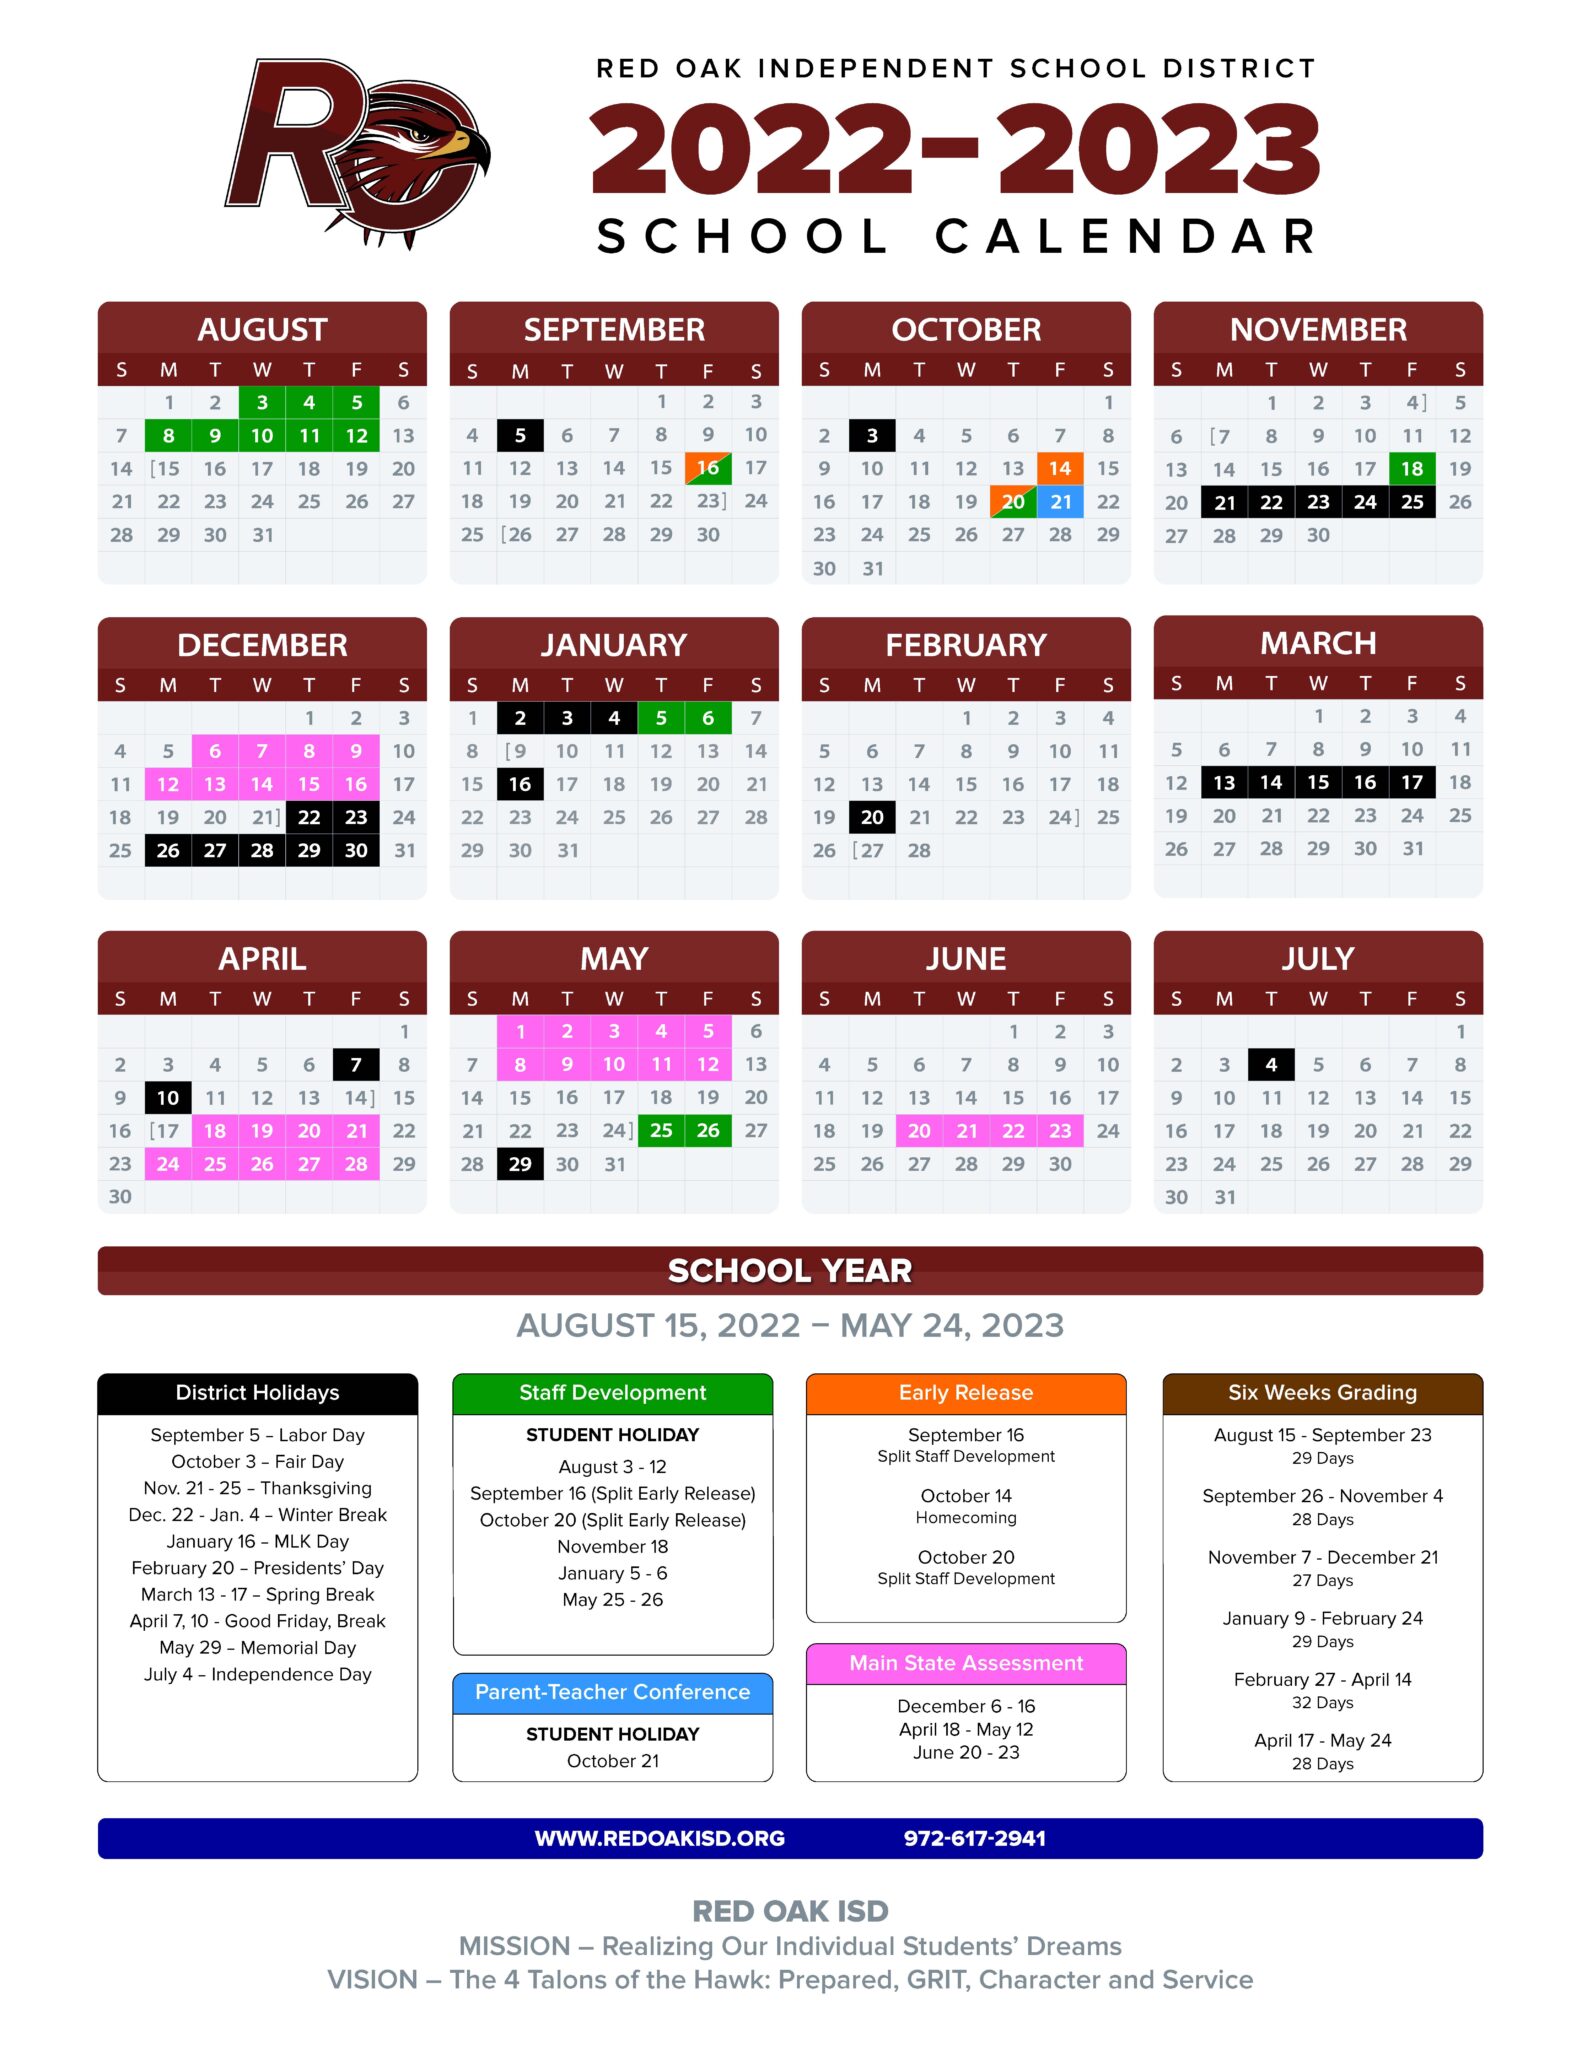 red-oak-isd-2022-2023-school-calendar-emphasizes-instructional-time-in-classroom